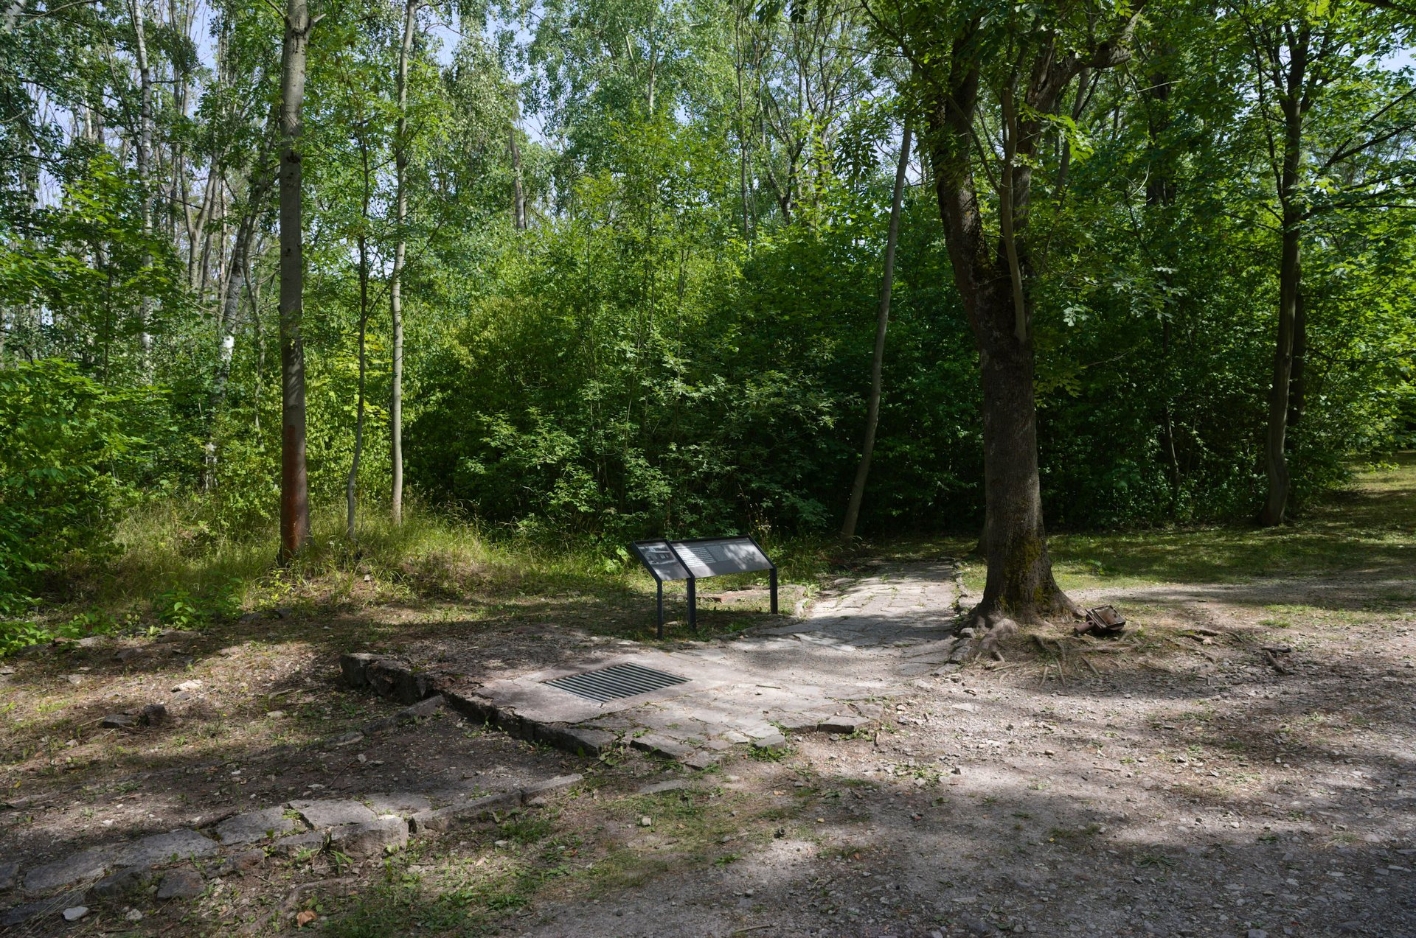 The picture shows concrete slabs and a metal grid embedded in the ground. At the edge between trees is an information sign.